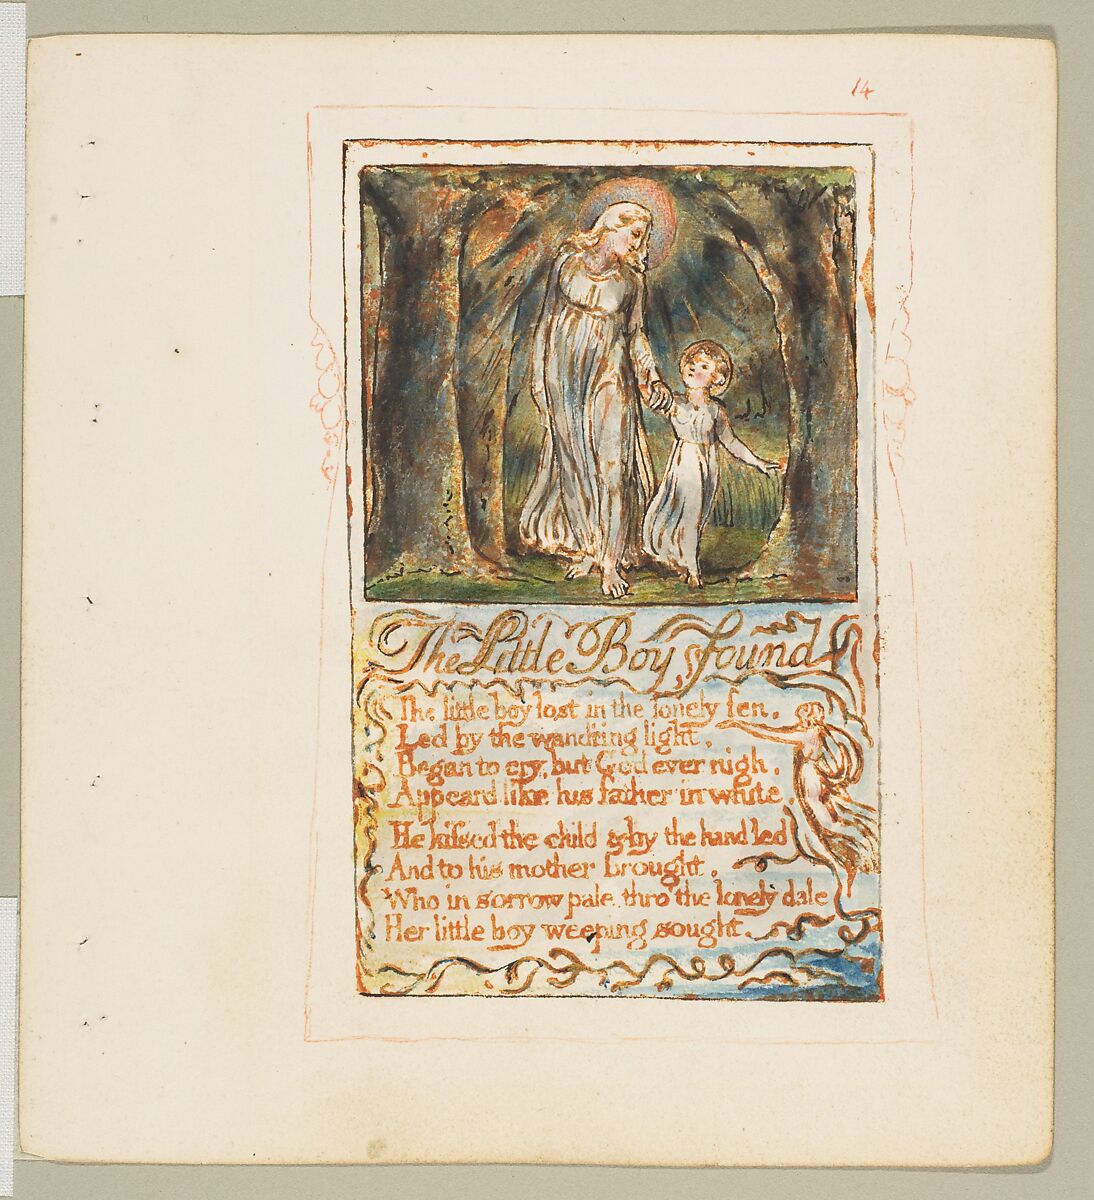 Songs of Innocence: The Little Boy Found, William Blake  British, Relief etching printed in orange-brown ink and hand-colored with watercolor and shell gold